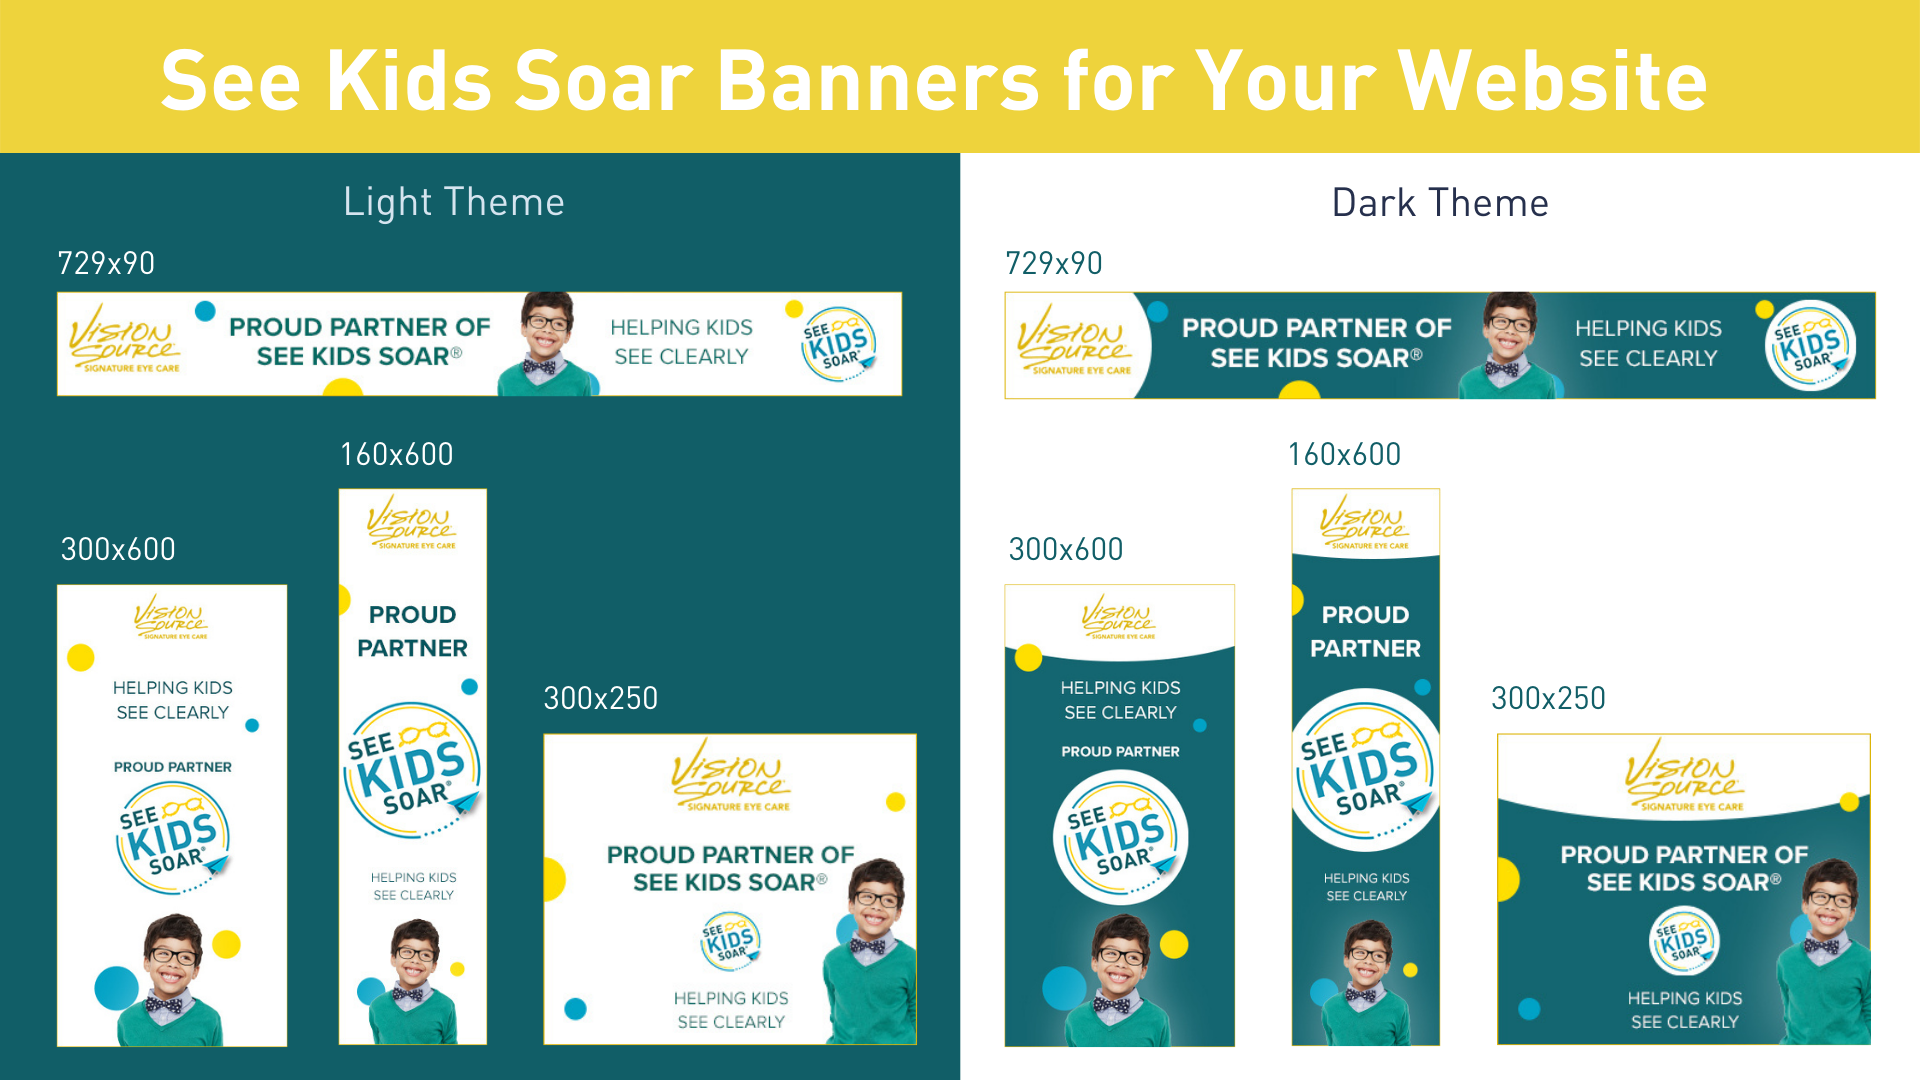 Vision Source See Kids Soar banners